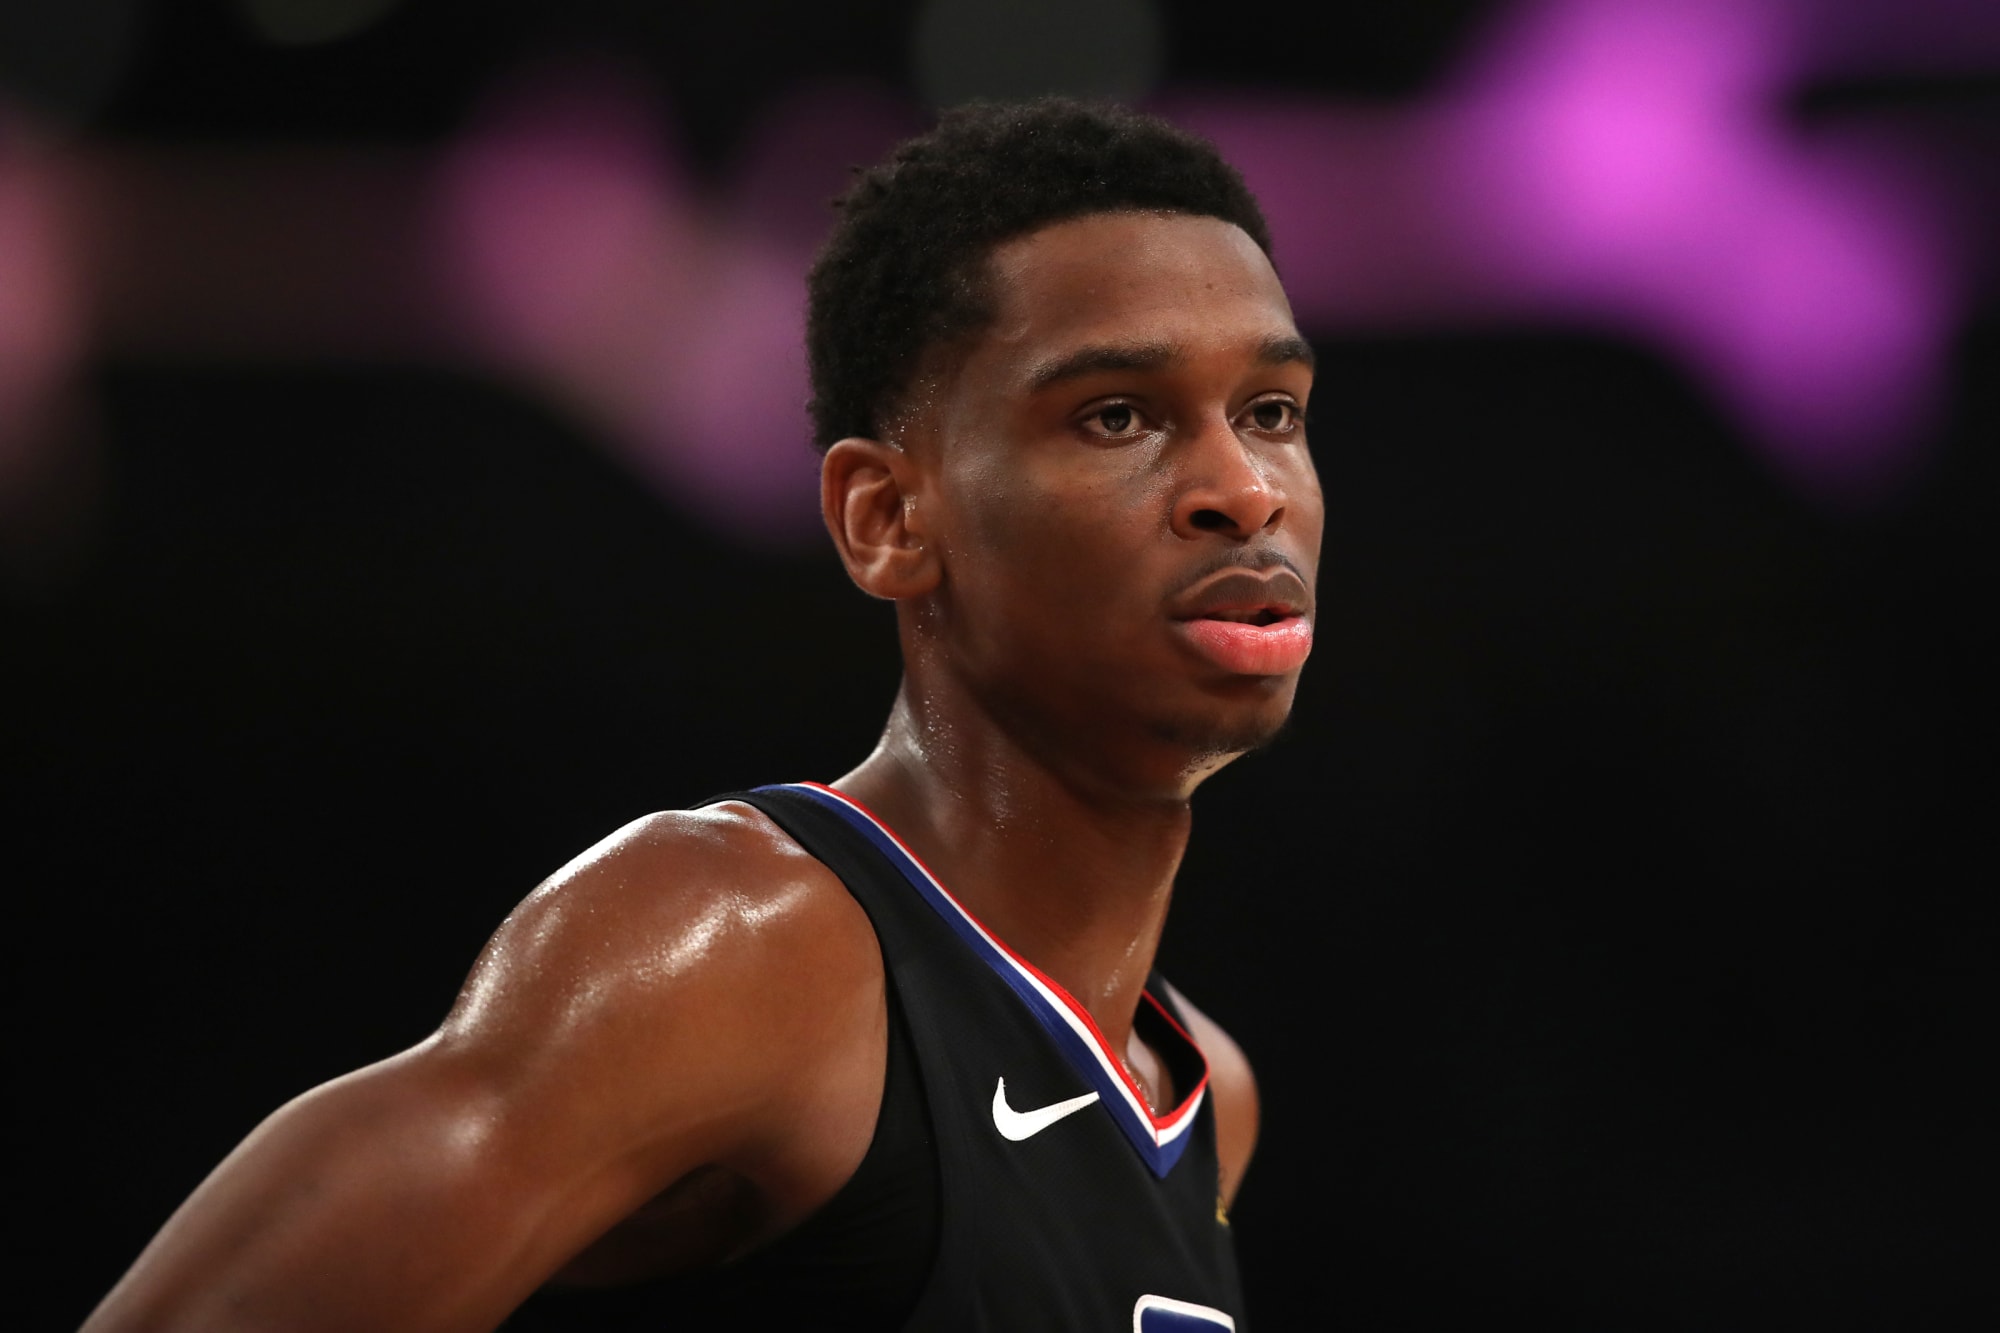 Doc Rivers Was 'Not So Sure' About Trading Shai Gilgeous-Alexander